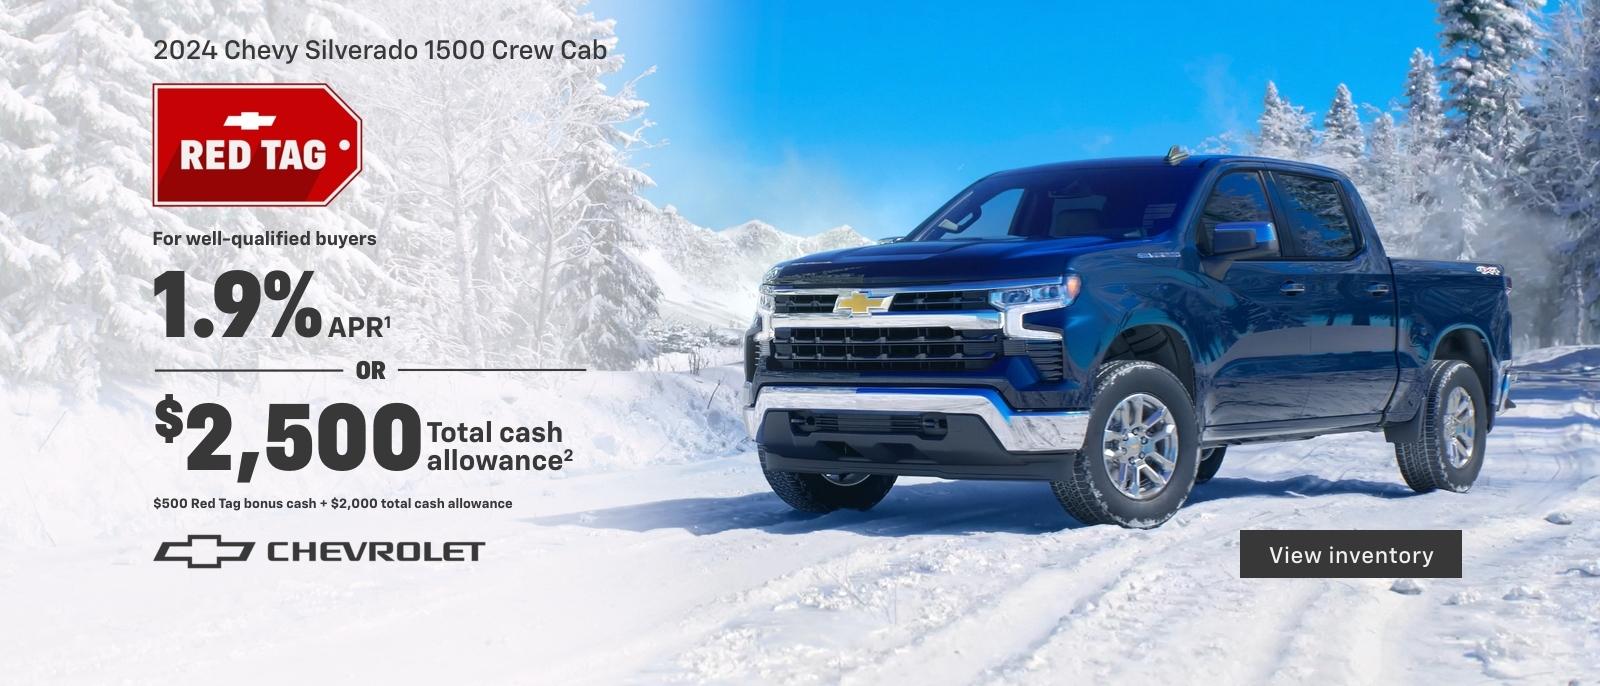 2024 Chevy Silverado 1500 Crew Cab. Do more together this holiday season. For well-qualified buyers 1.9% APR. Or, $2,500 Total cash allowance. $500 Red Tag bonus cash + $2,000 Total cash allowance.